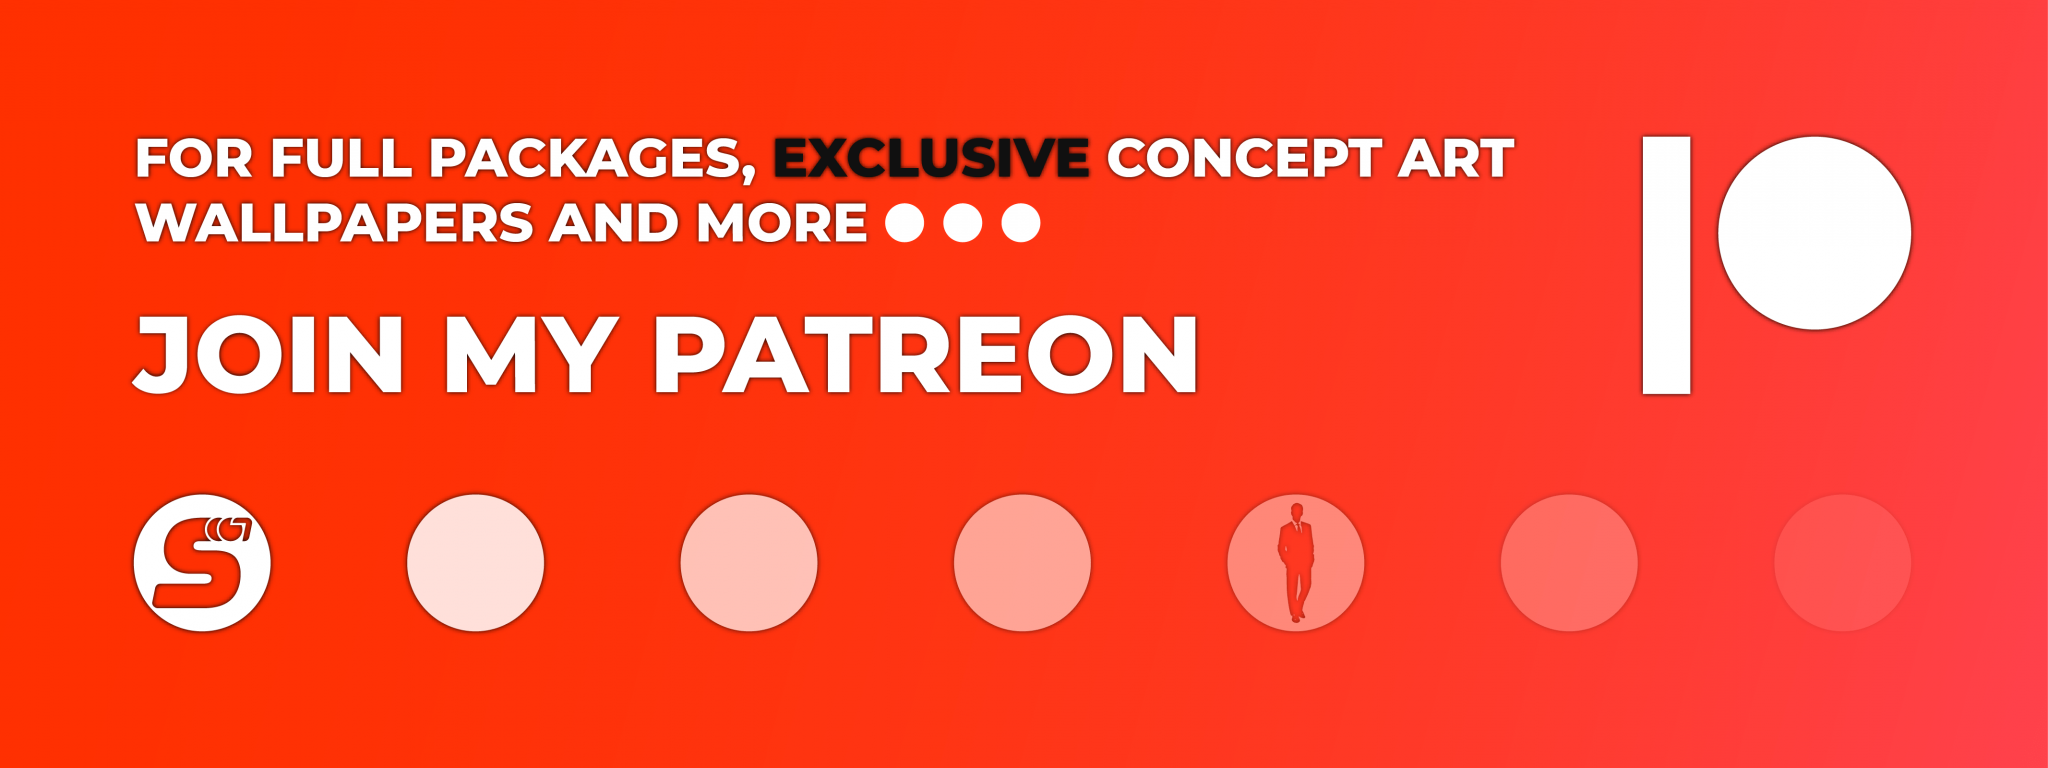 join my patreon full v2.png